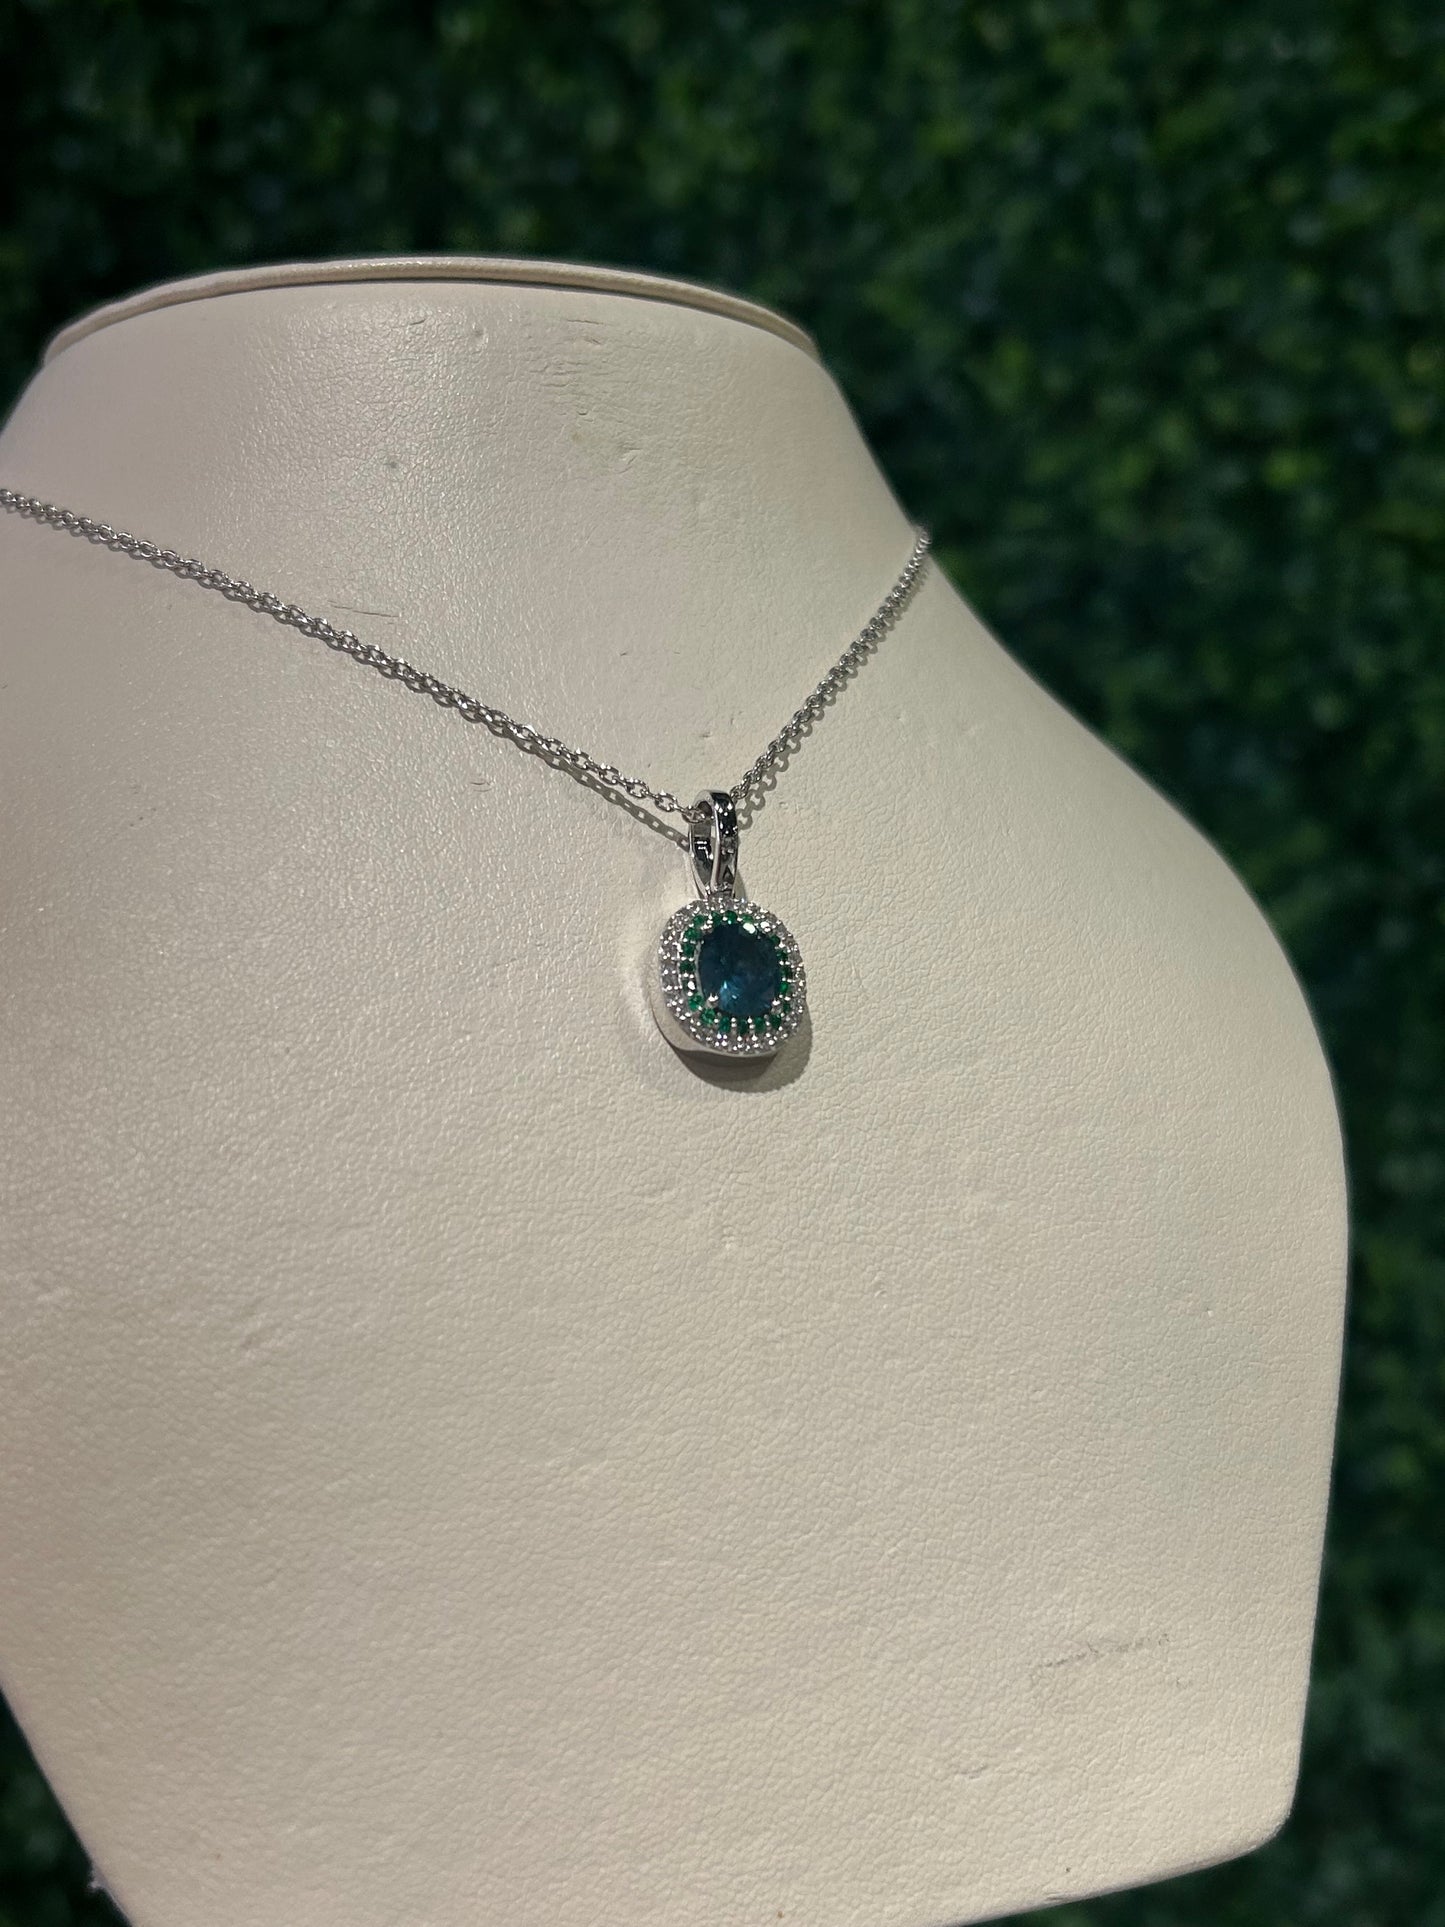 14k White Gold Sapphire Pendant with Diamond and Emerald Halo - The Village Jeweler